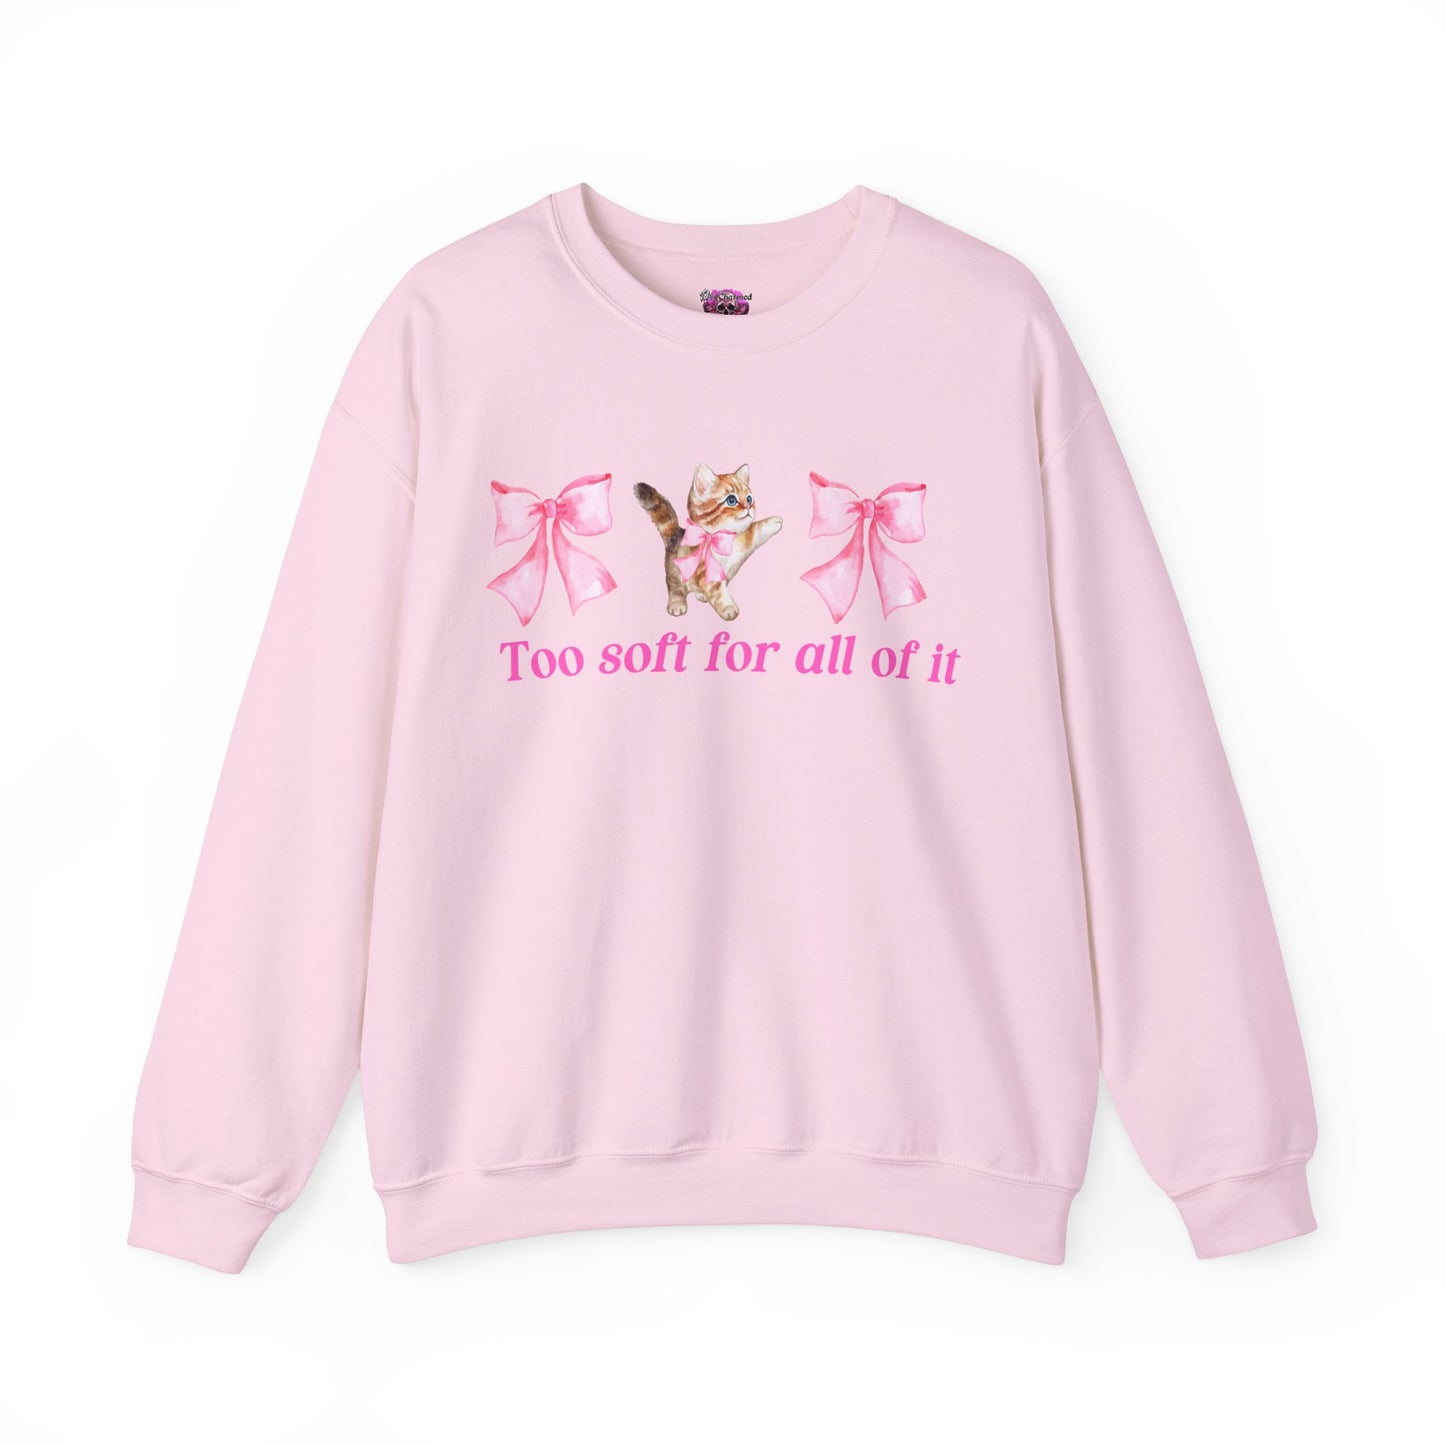 Too soft for all of it Crewneck